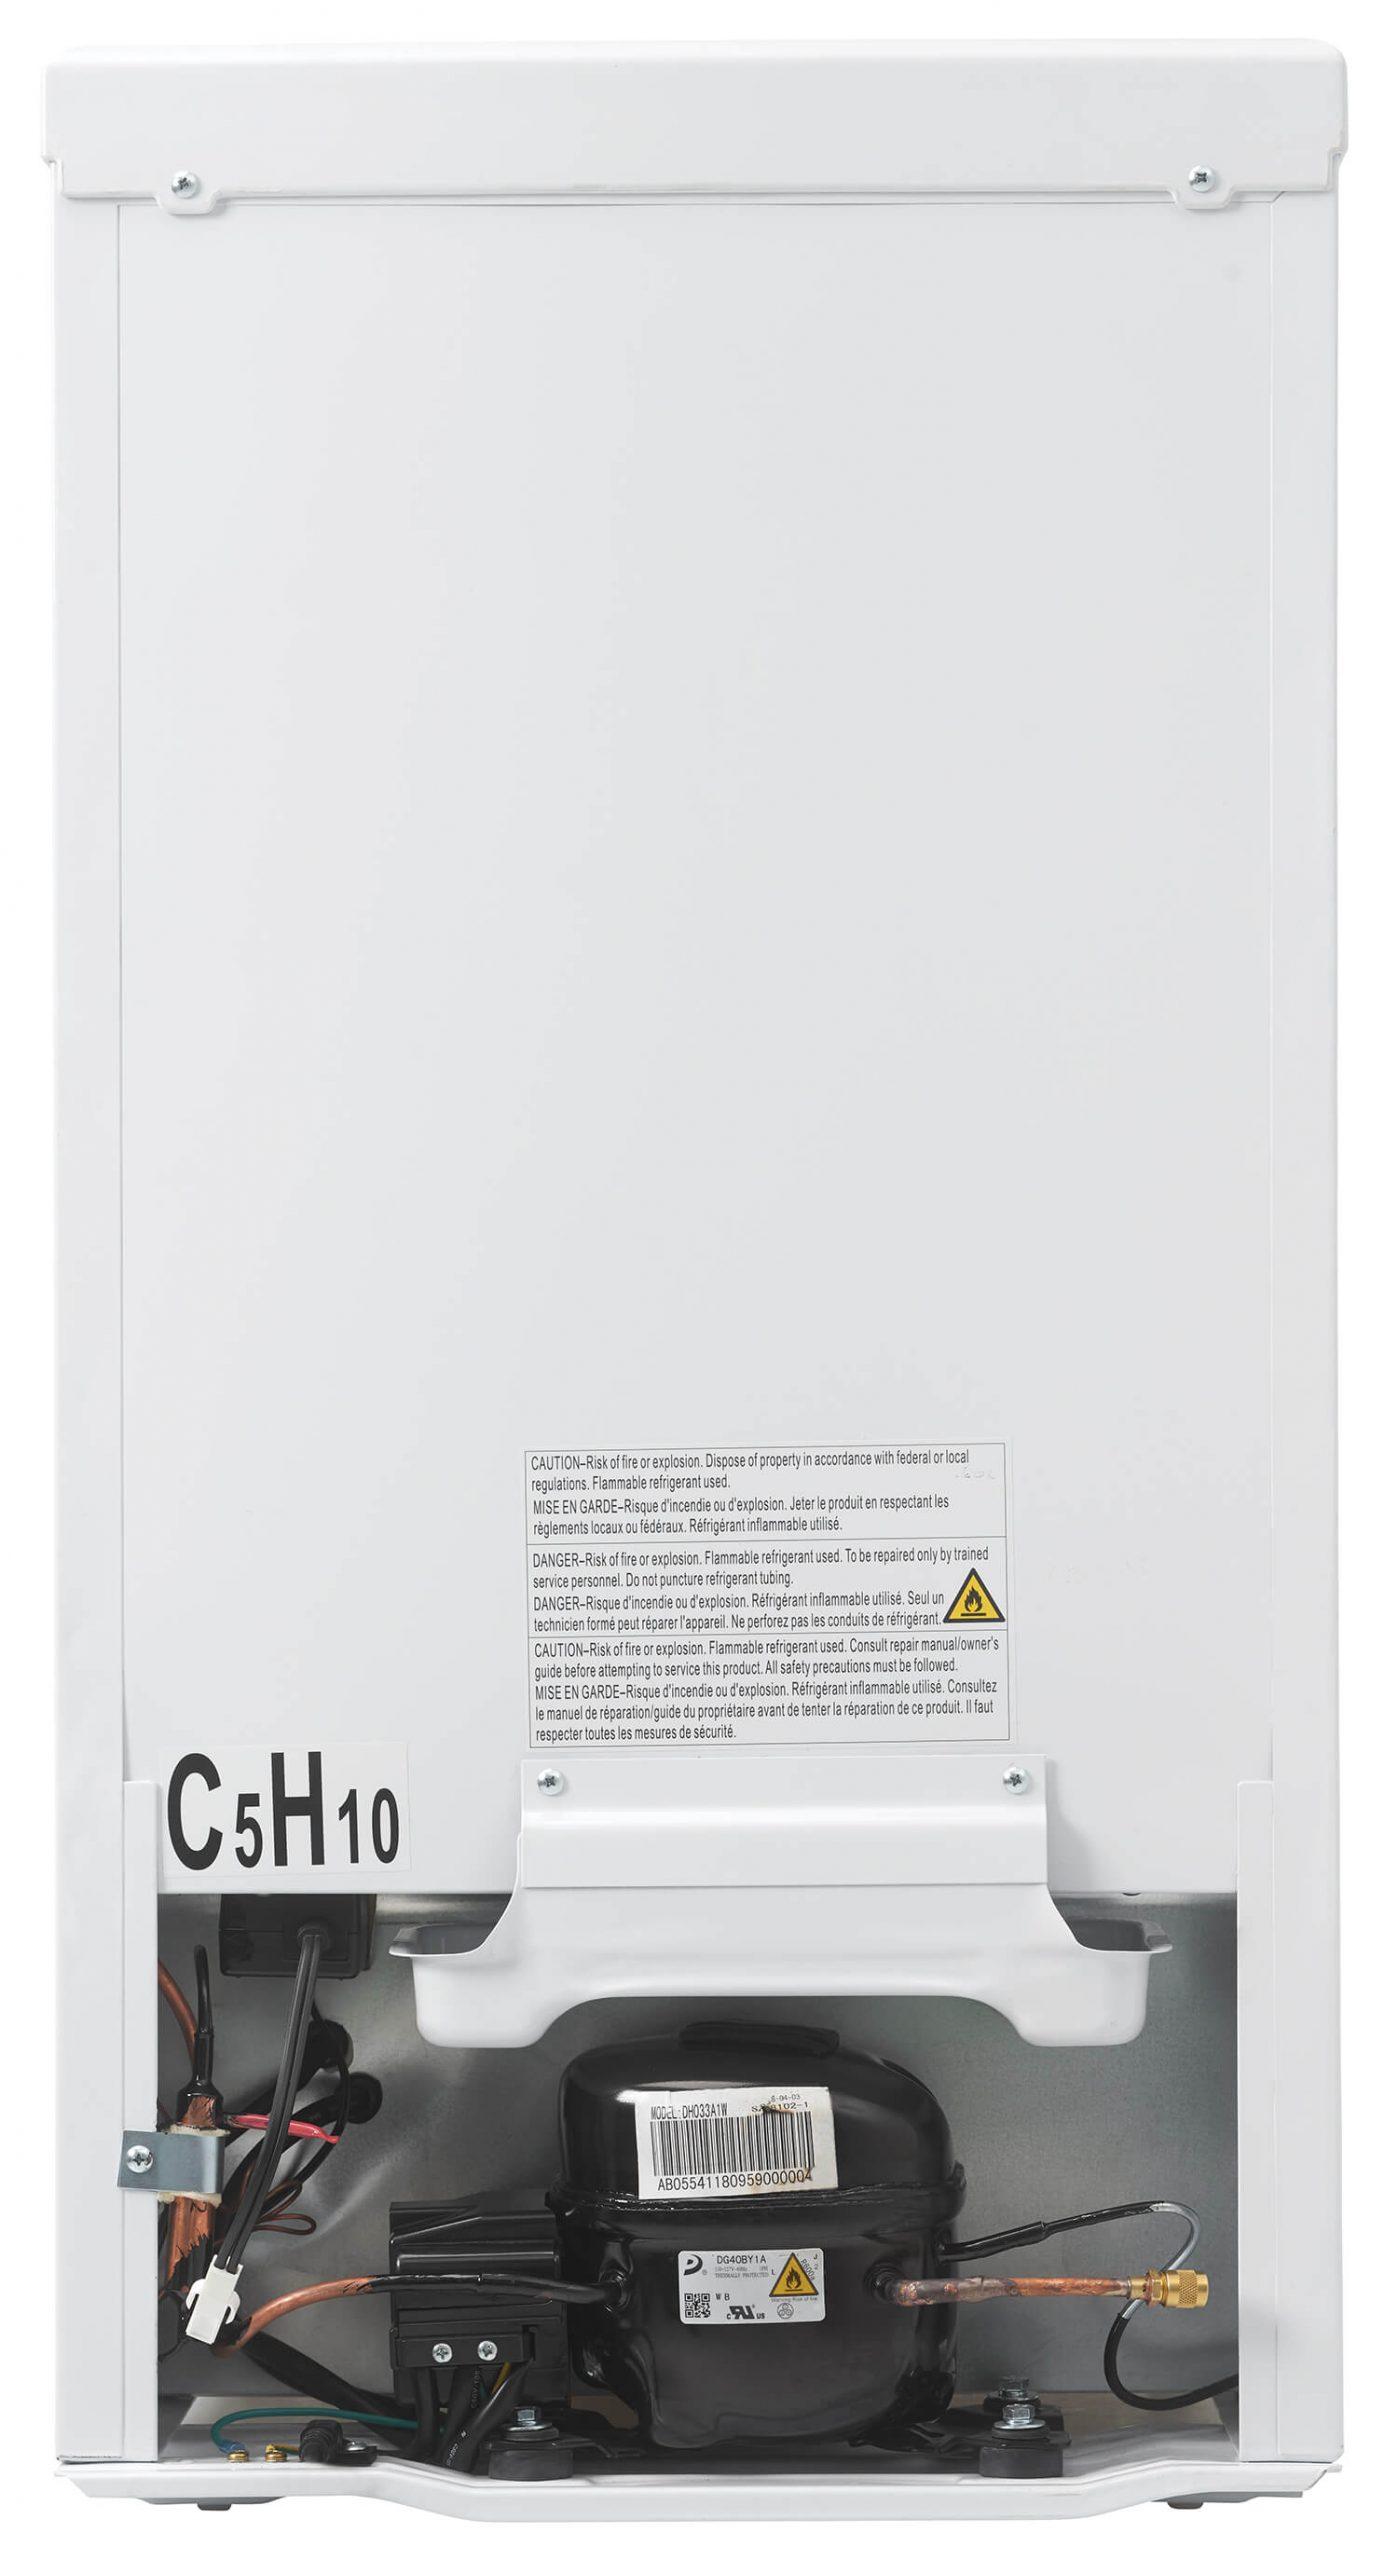 Danby DH032A1WD Danby Health 3.2 Cu. Ft Compact Refrigerator Medical And Clinical